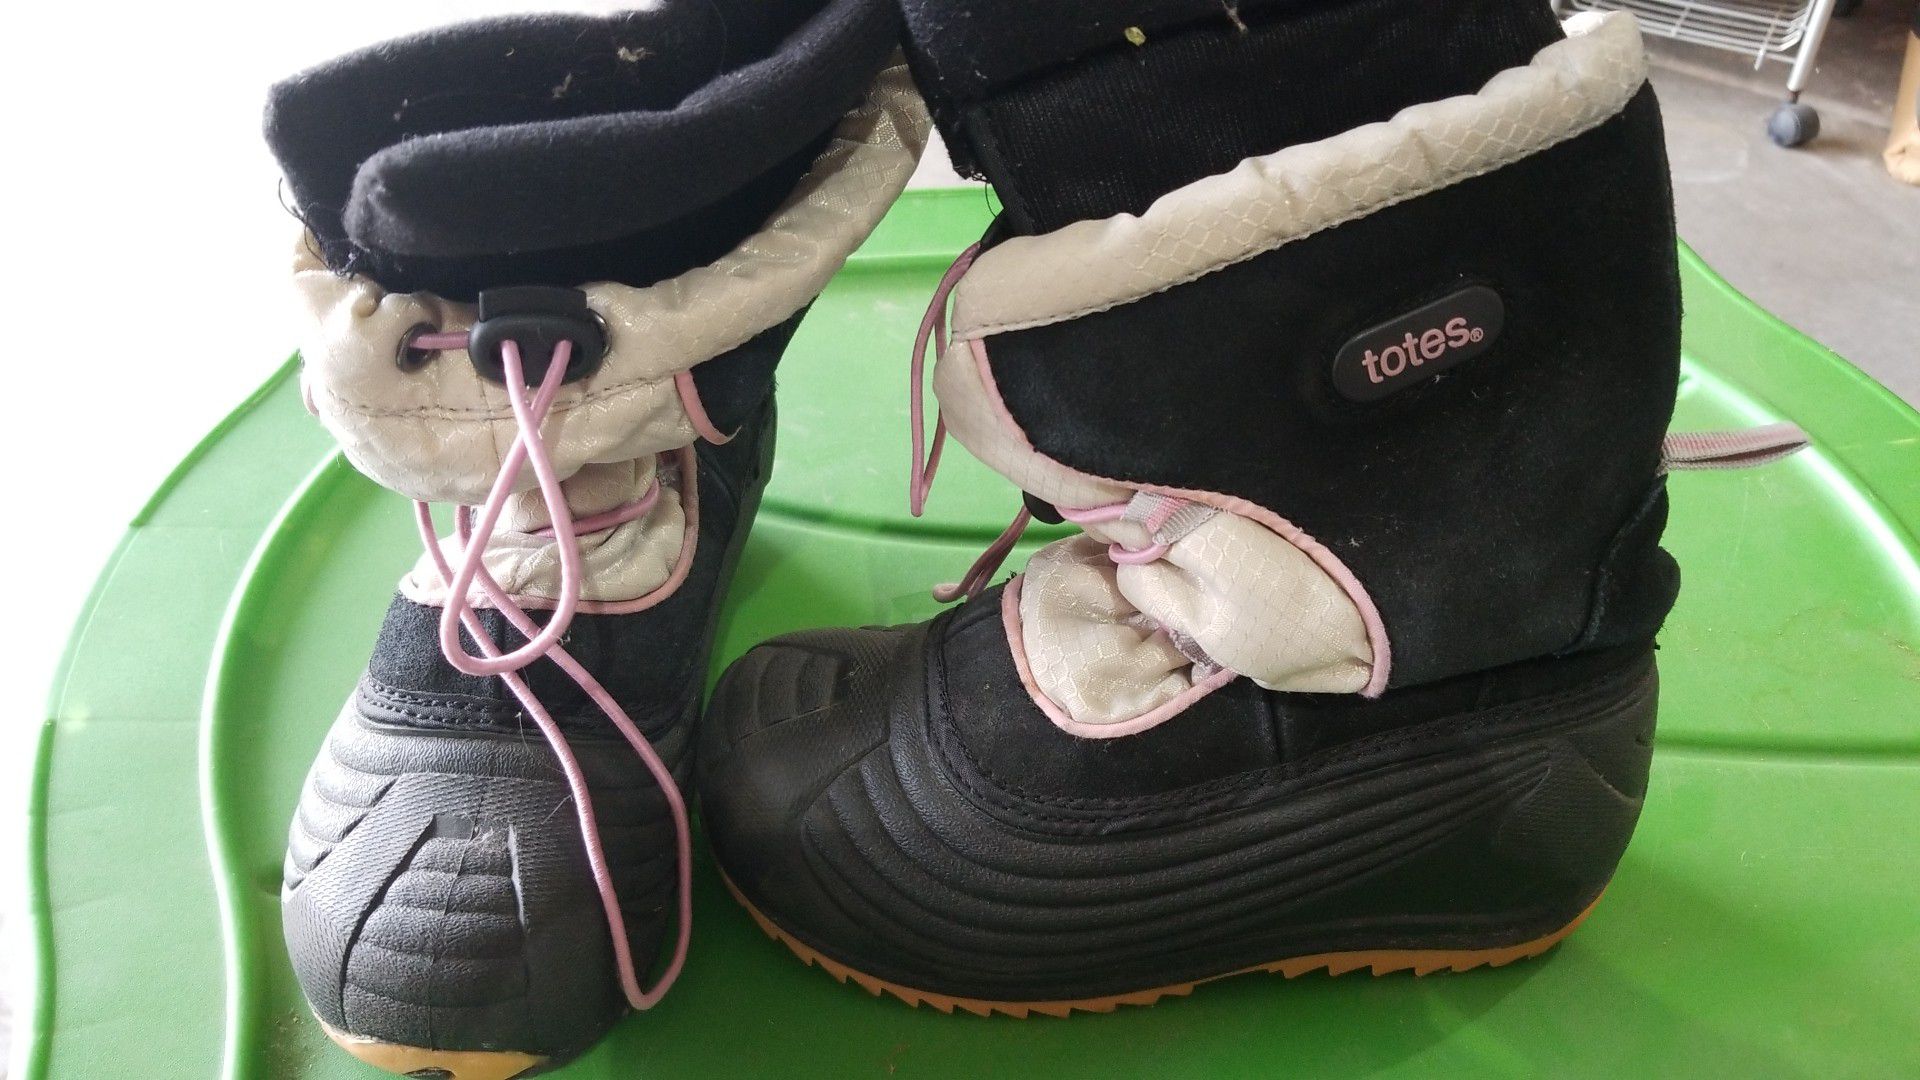 Girls snow boot size 13